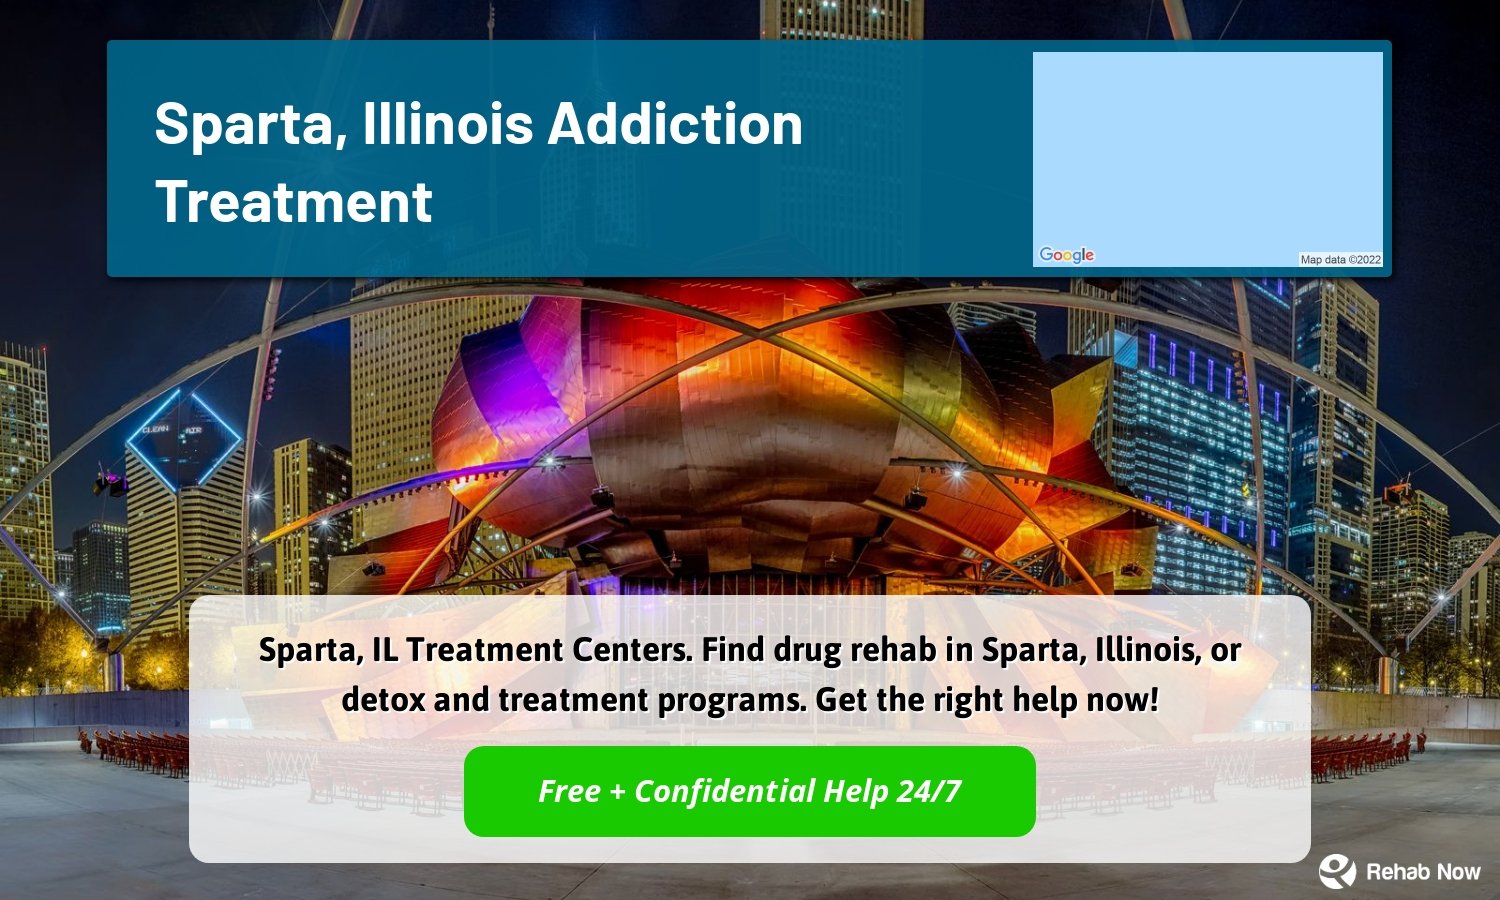 Sparta, IL Treatment Centers. Find drug rehab in Sparta, Illinois, or detox and treatment programs. Get the right help now!